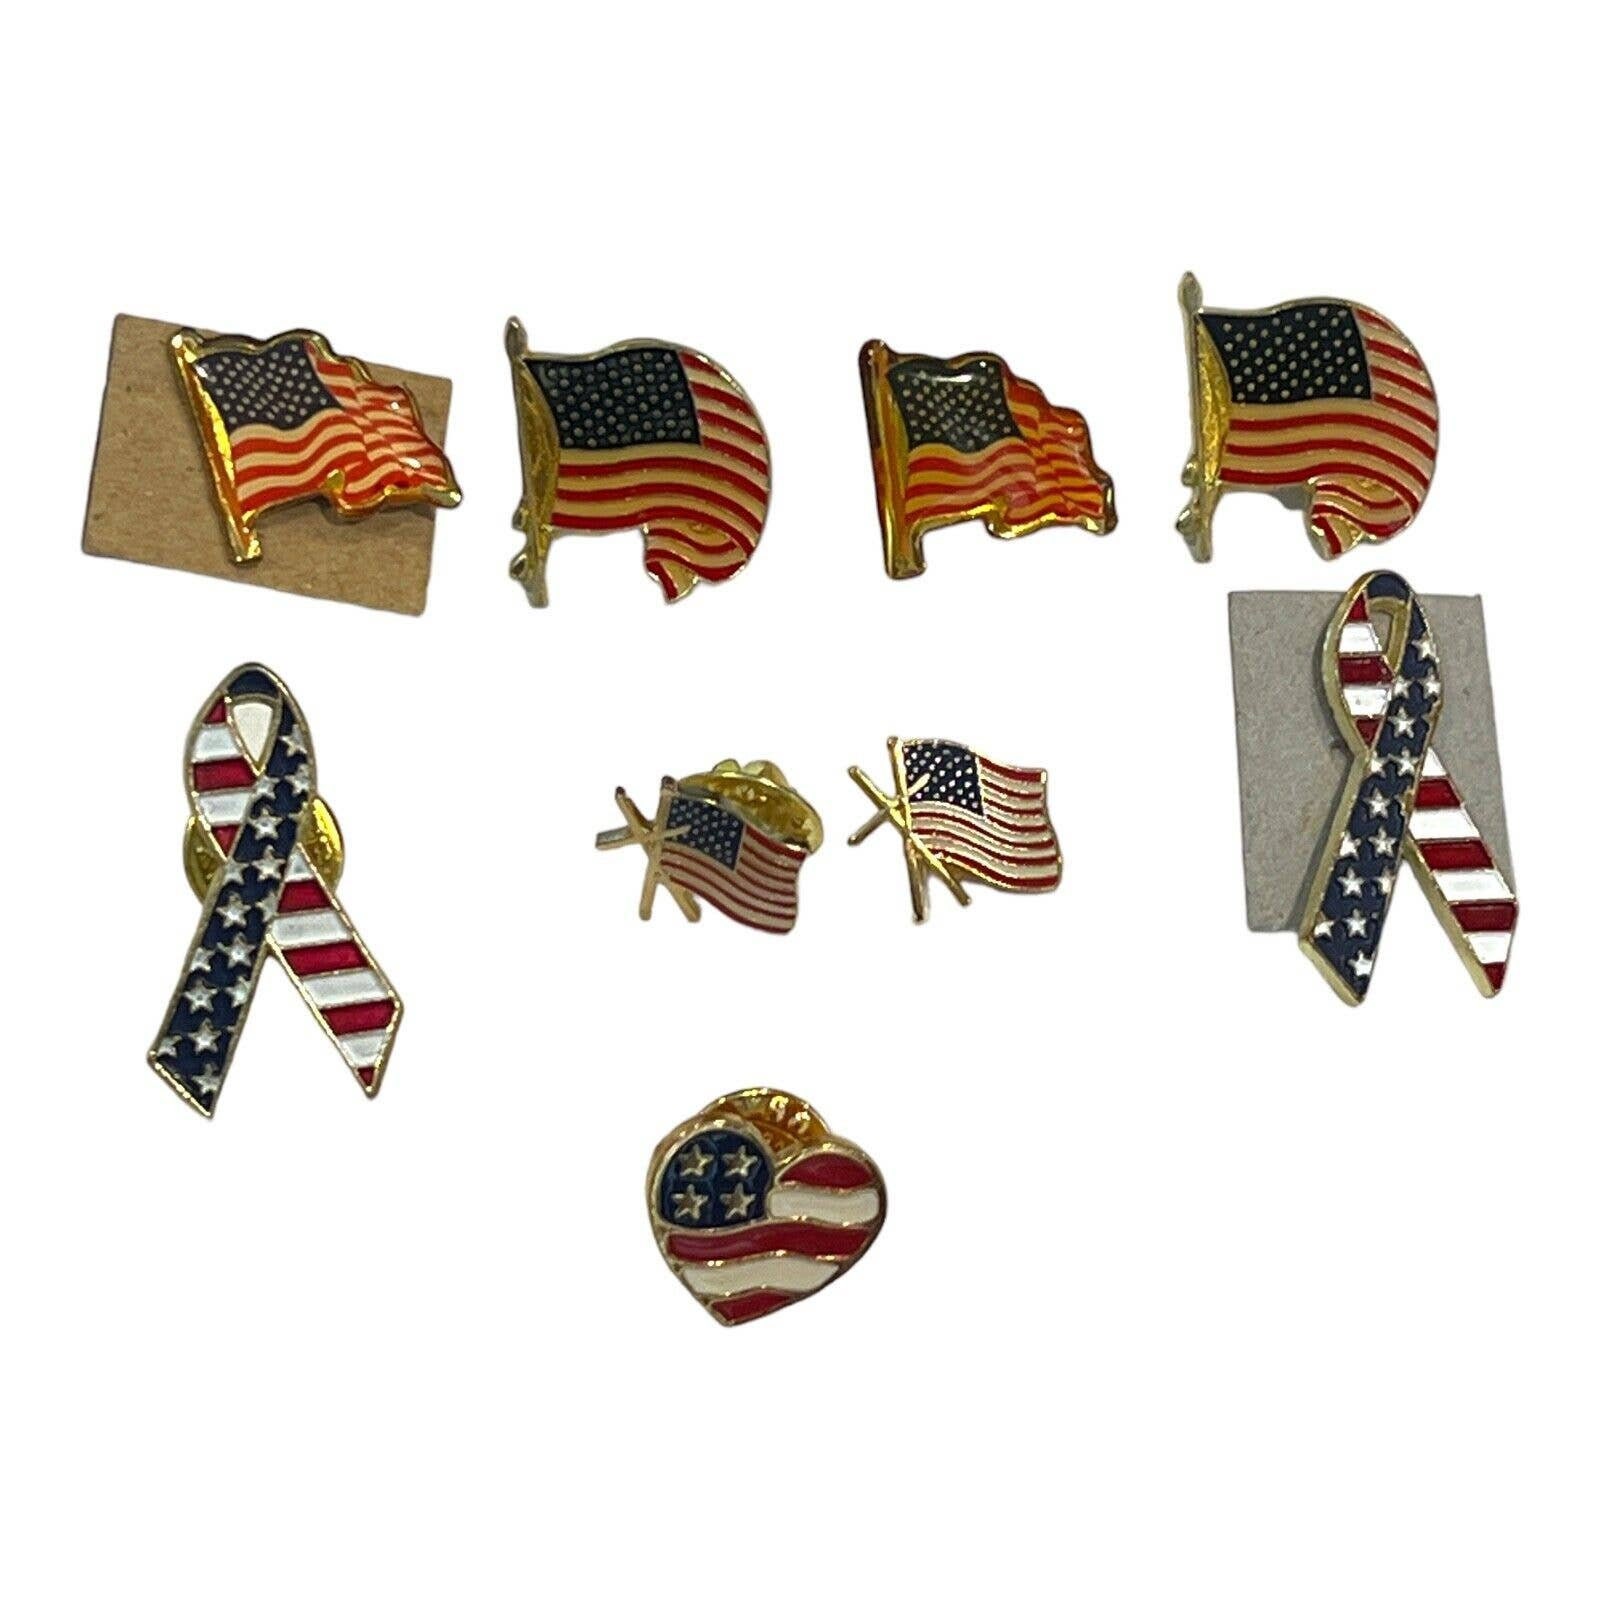 Officially Licensed Semper Fi Pin | Multi Color | Military Pins by PinMart